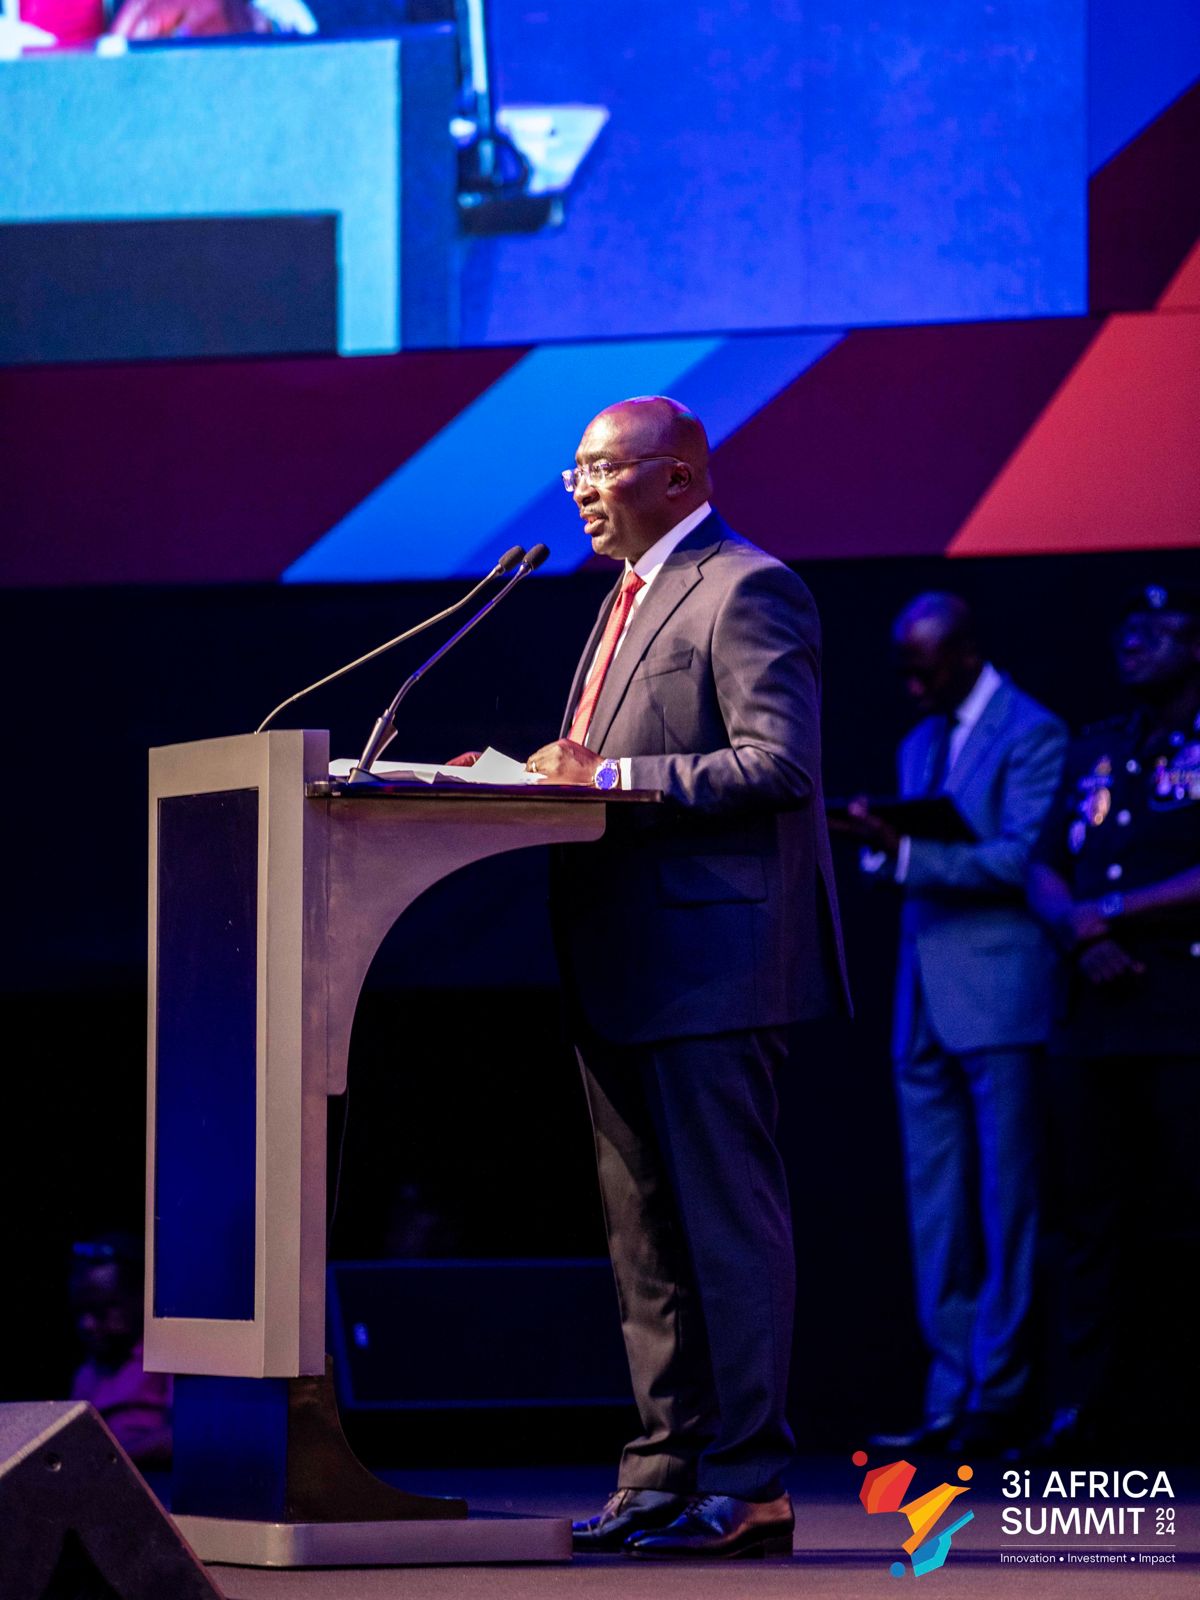 I’m confident and comfortable in getting close to Christians – Bawumia